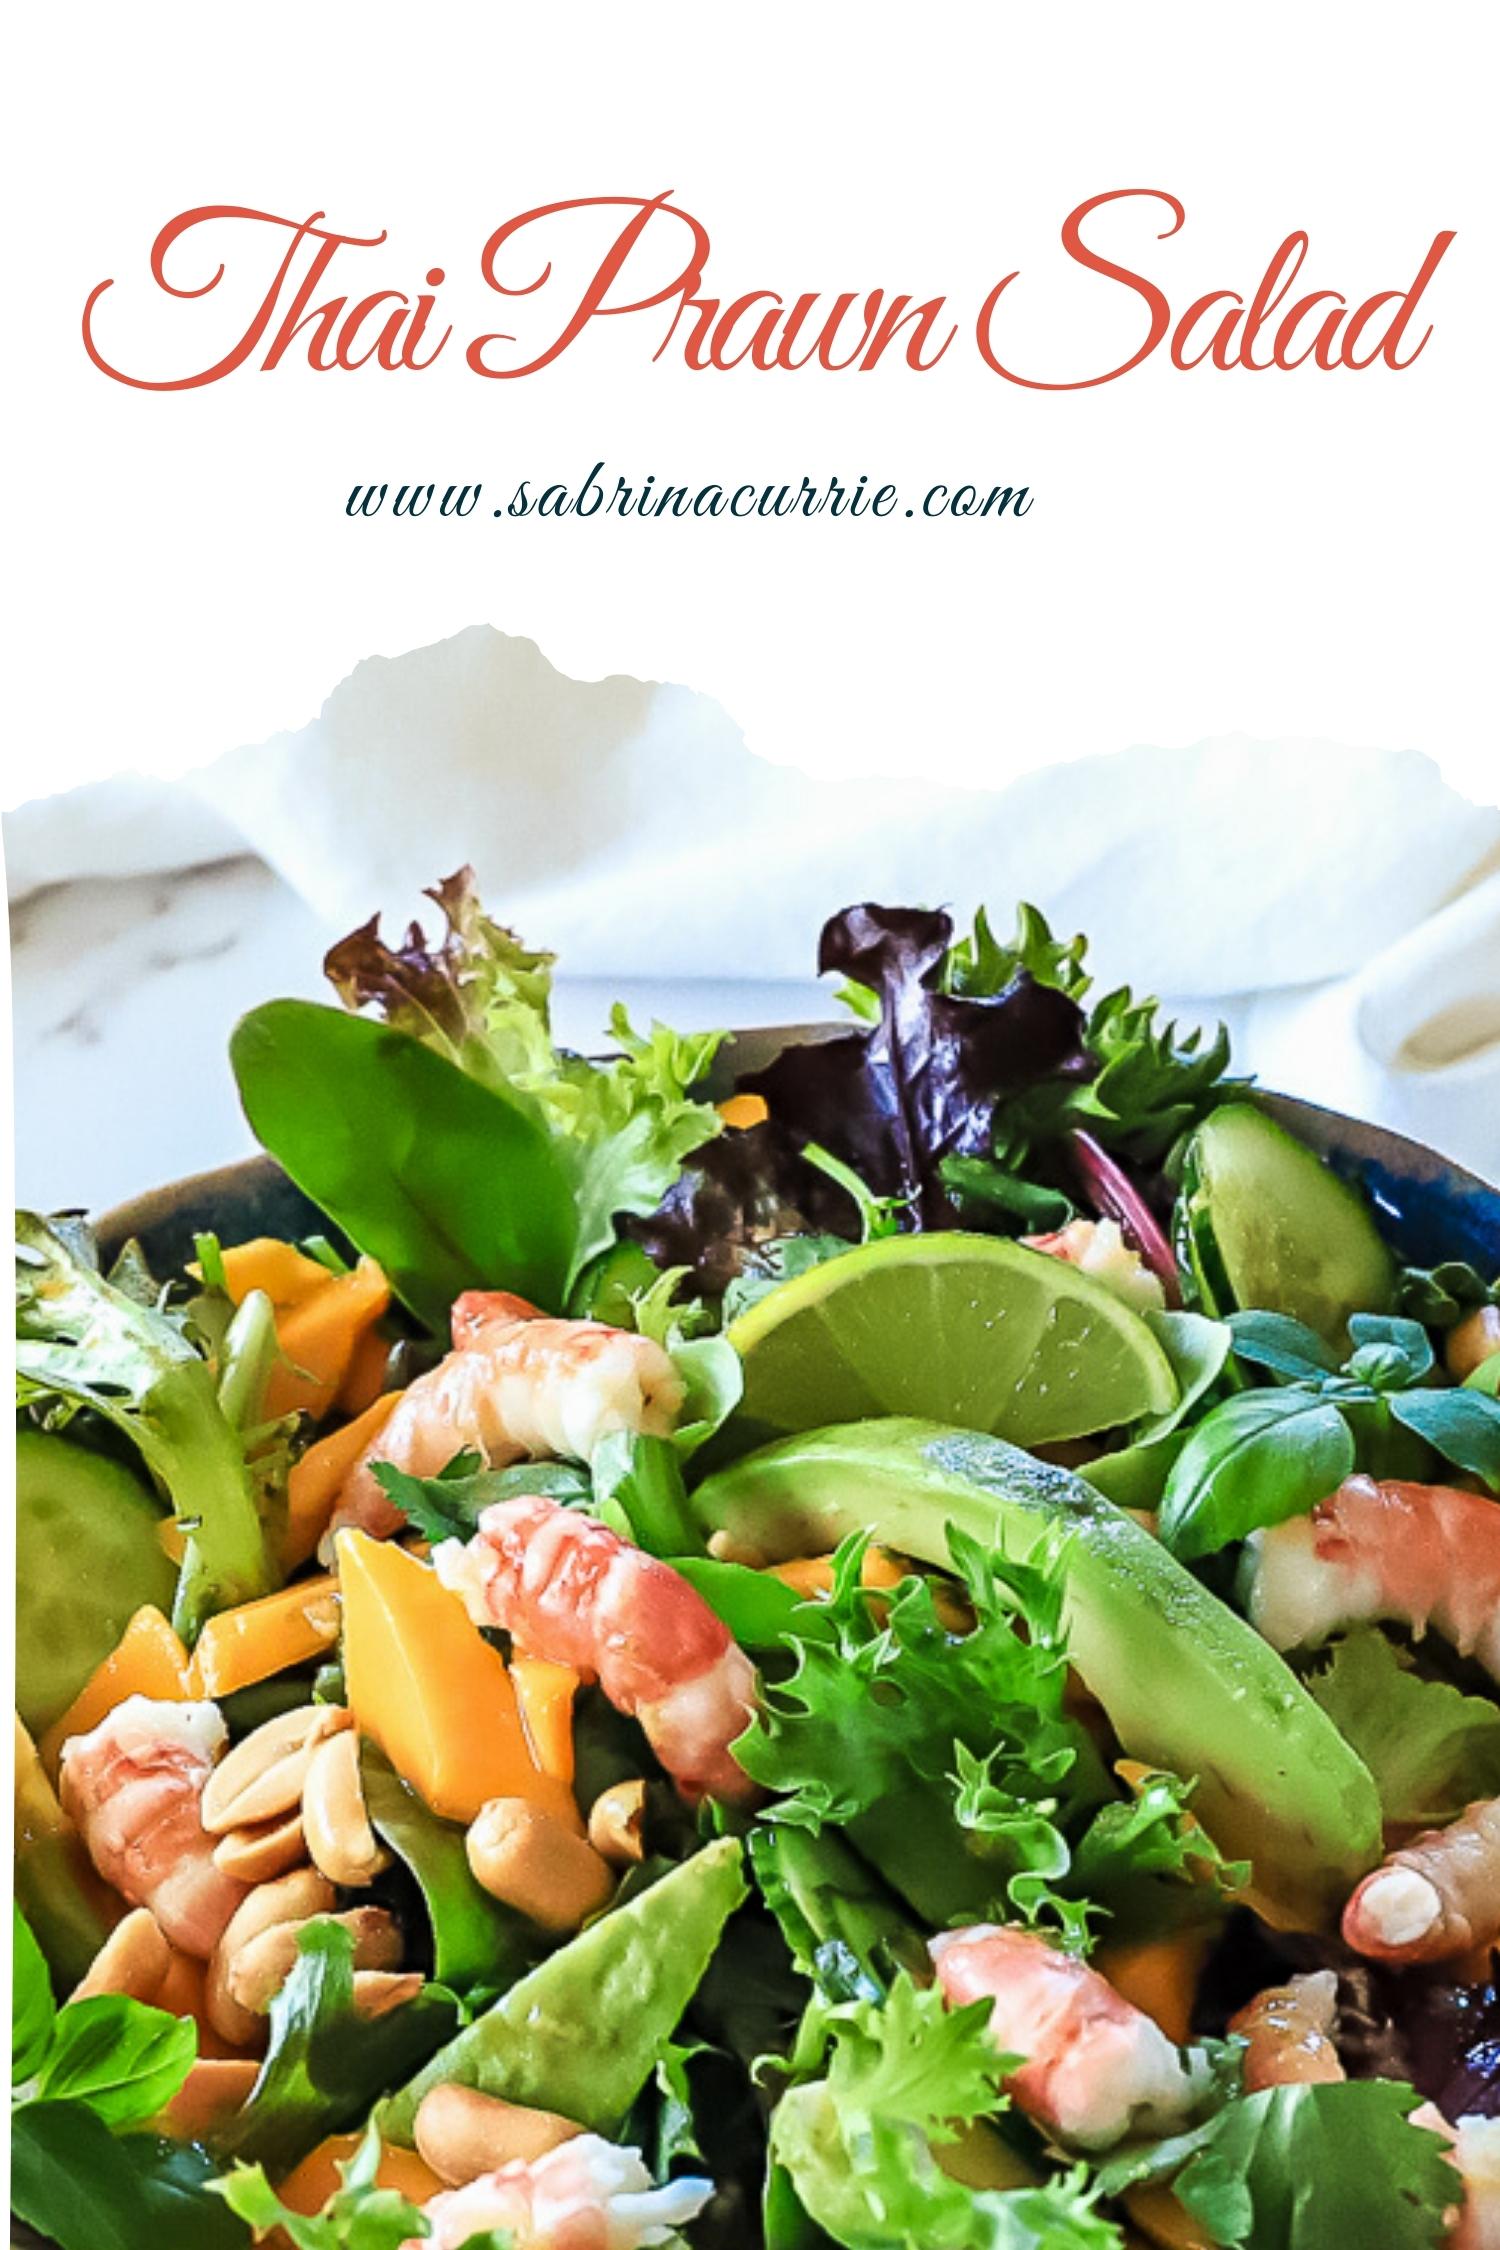 A closeup of the salad showing peeled pink prawns, bright green leaves and orange mango below text showing recipe name and blog site sabrinacurrie.com.